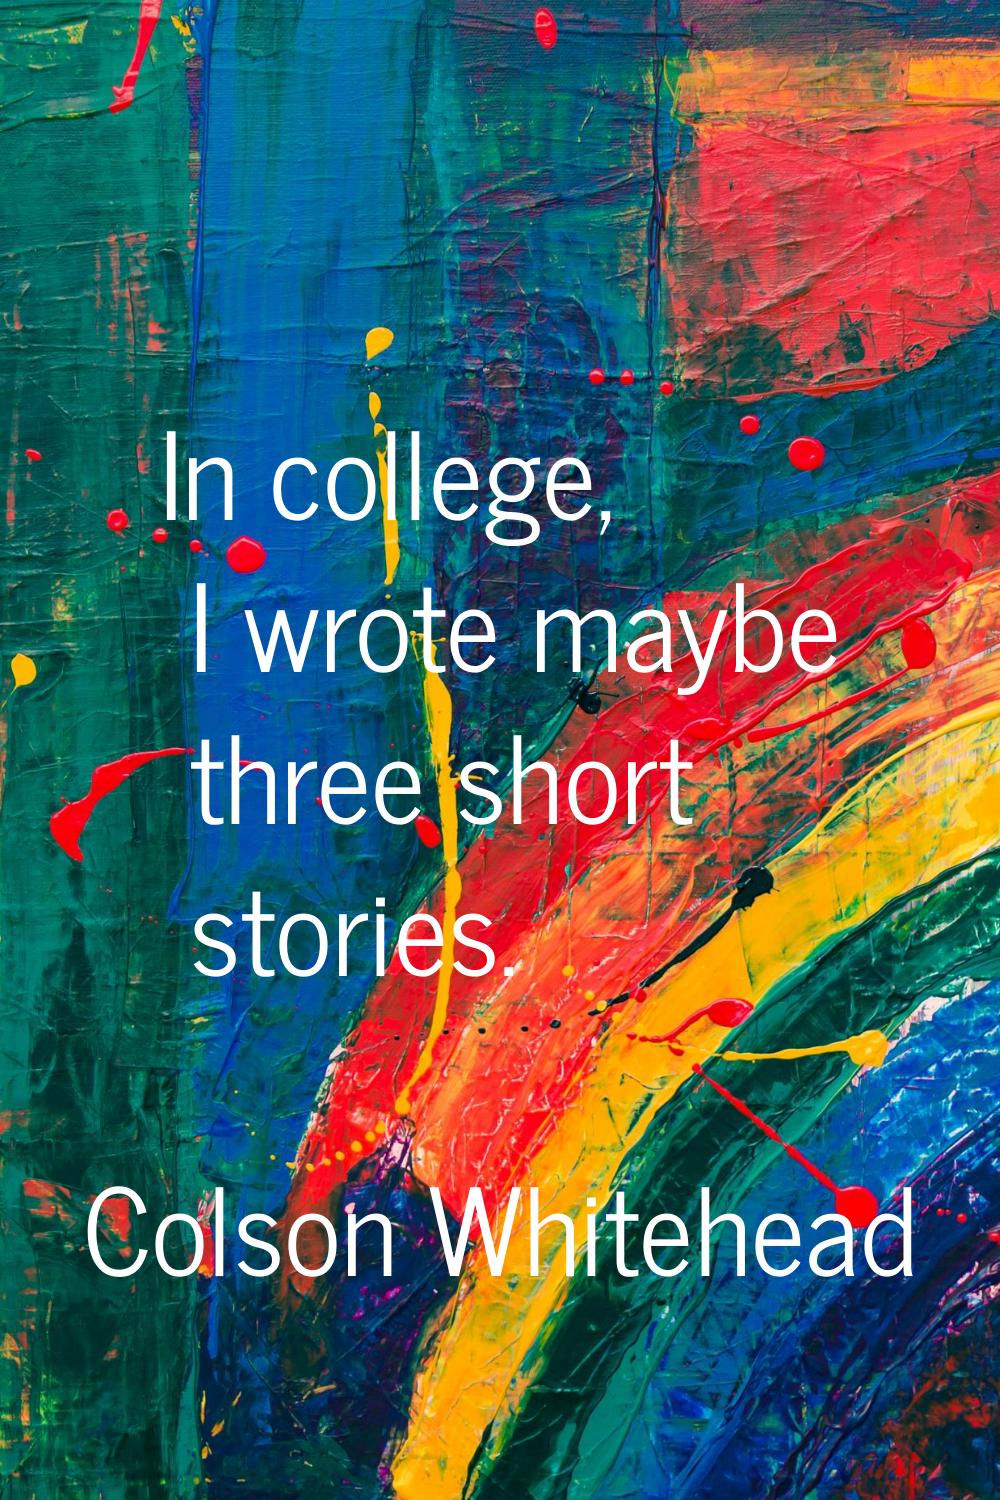 In college, I wrote maybe three short stories.